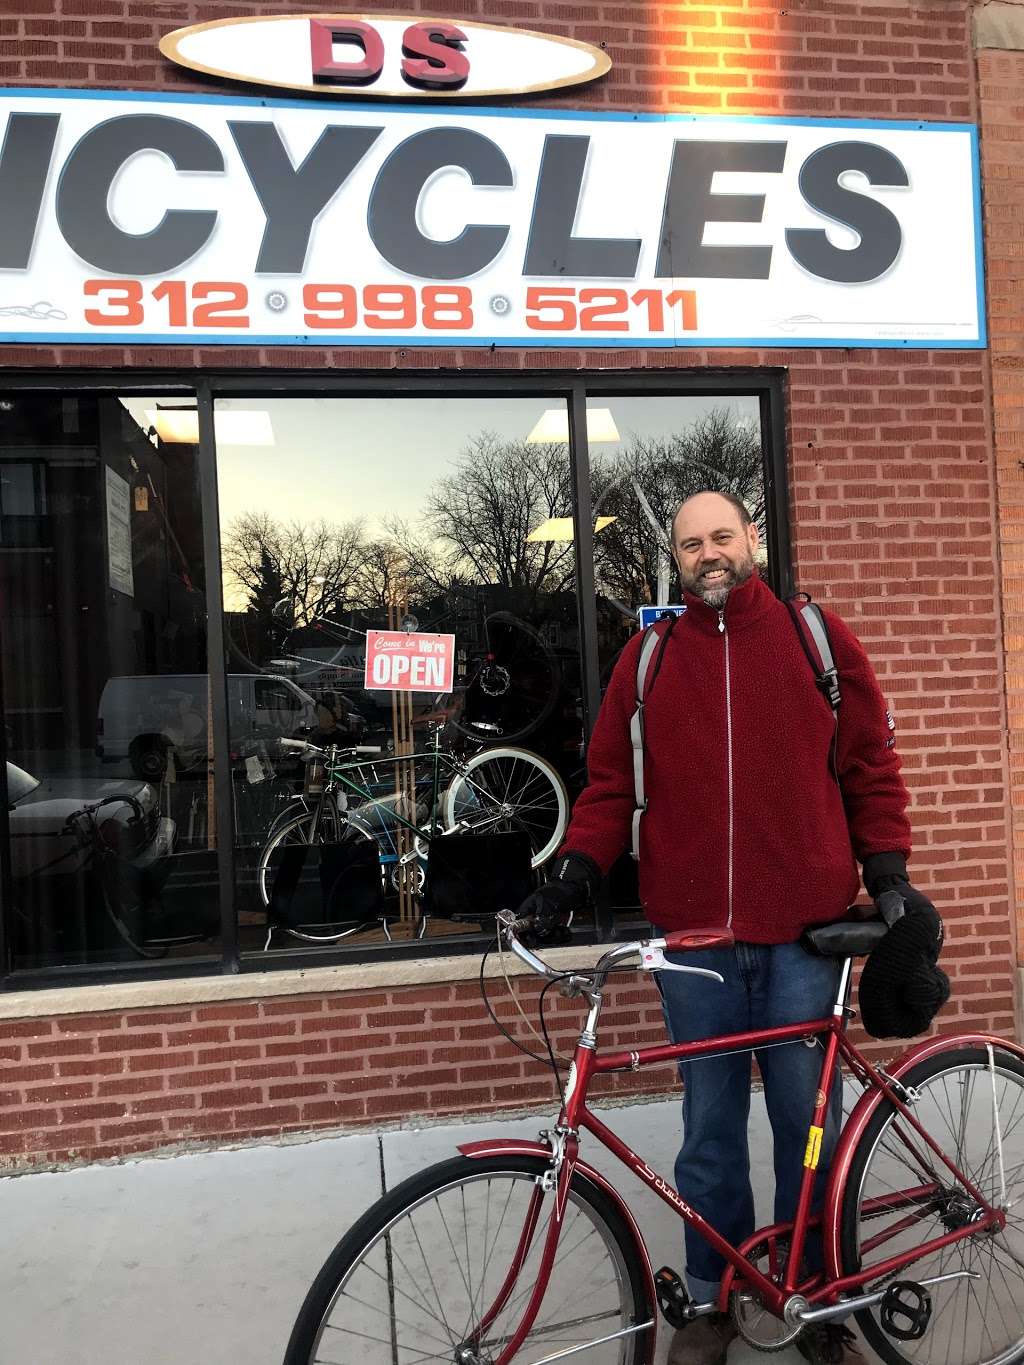 DS Bicycles | 4215 N Elston Ave, Chicago, IL 60618 | Phone: (312) 998-5211